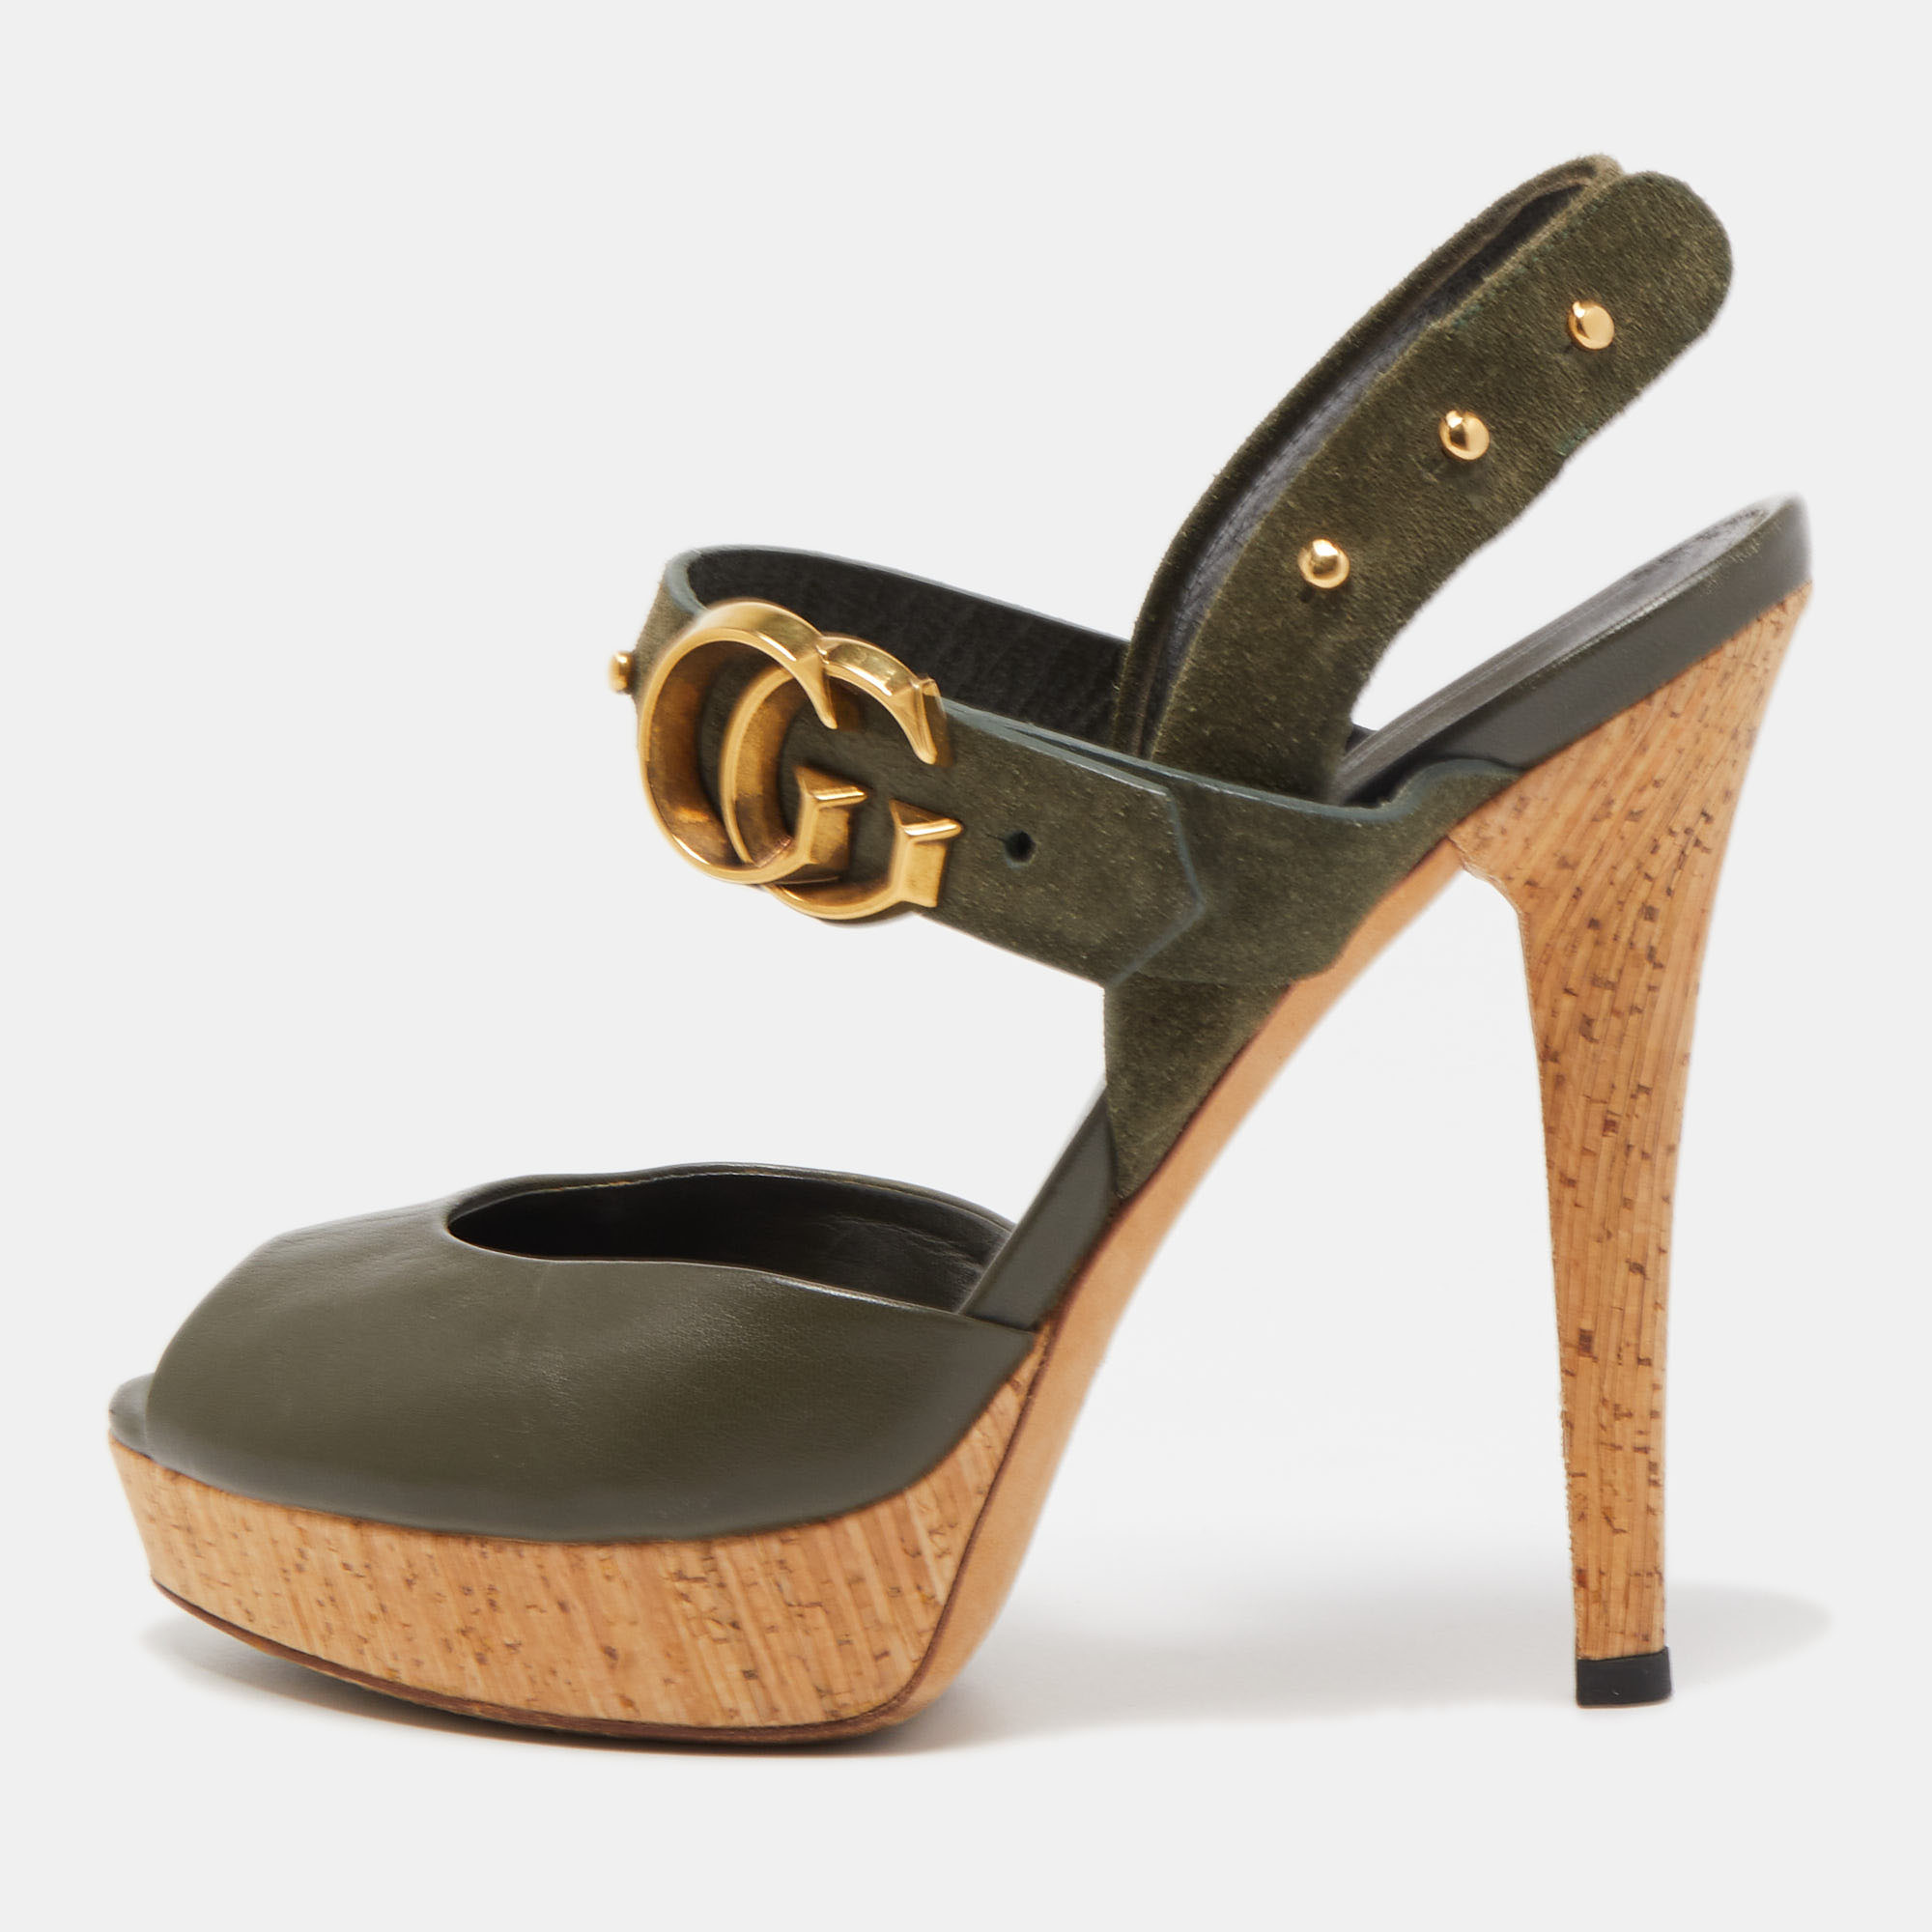 Enter the room stylishly in these olive green Gucci sandals. They have been made from leather and suede and flaunt complementing gold tone hardware. They have an ankle strap design and are supported on lovely cork platforms and 11cm heels.